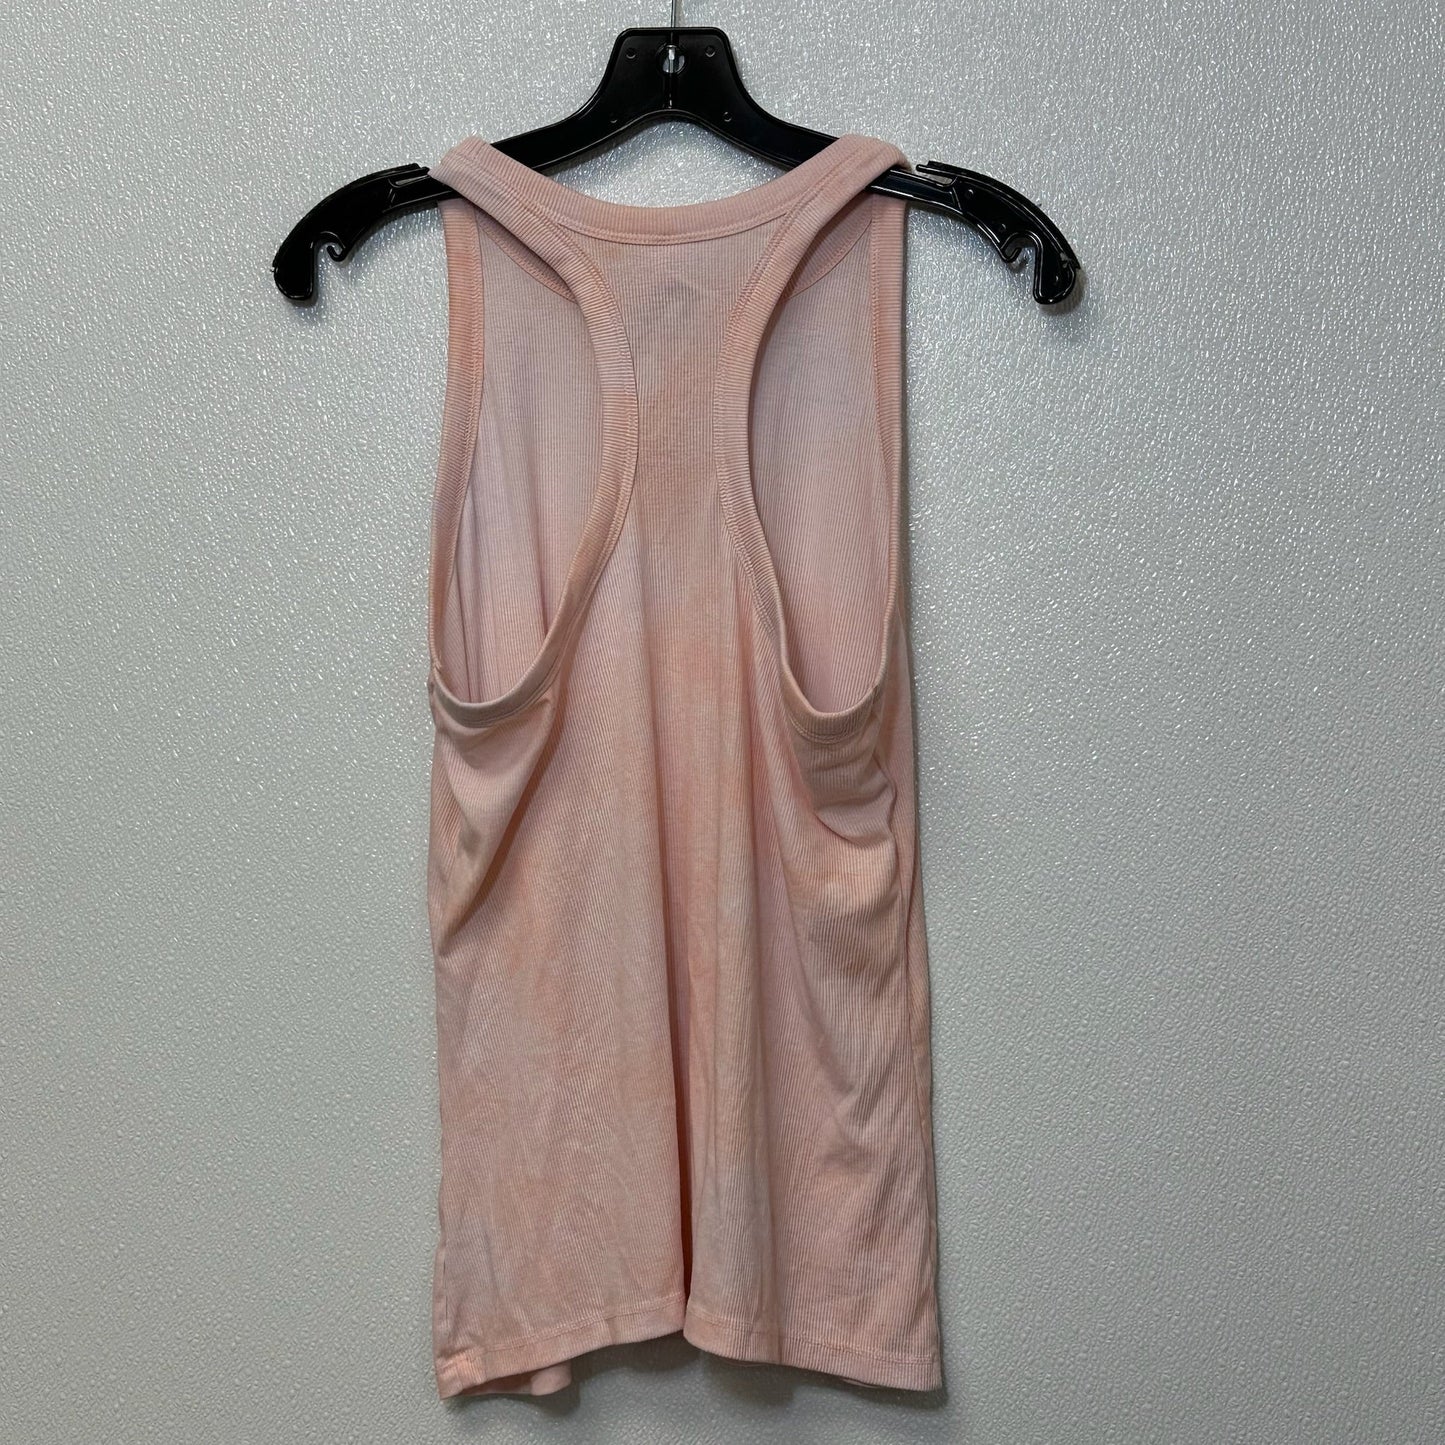 Pink Tank Top Old Navy, Size L